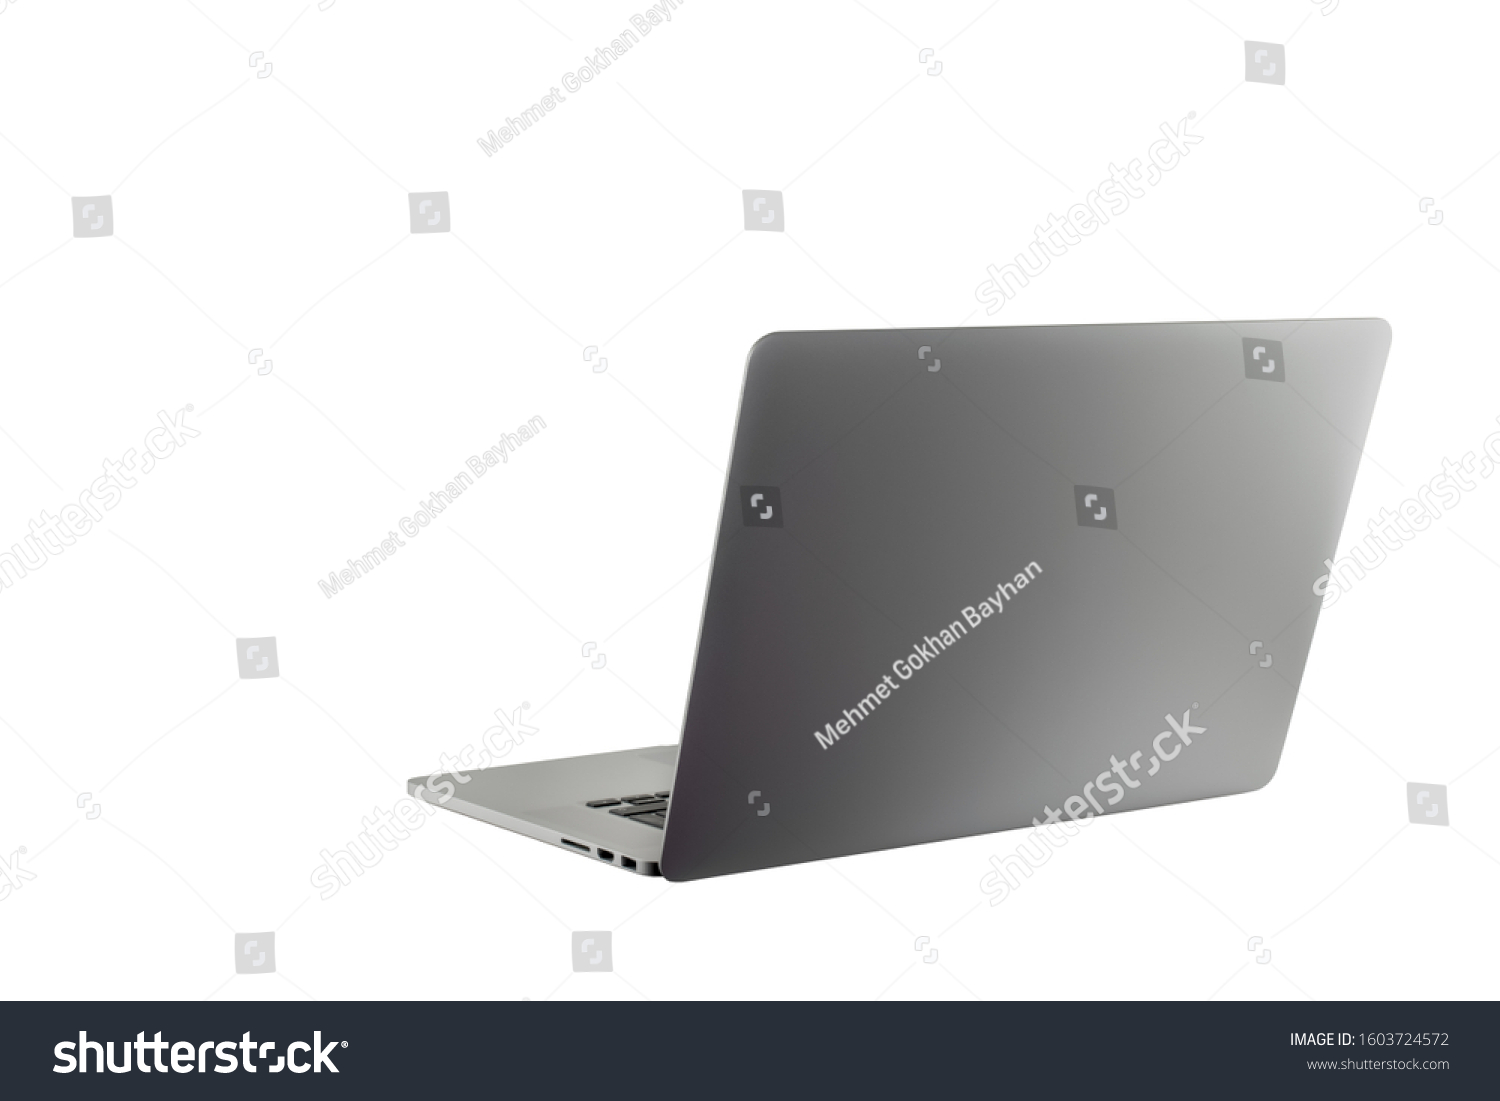 Open laptop notebook isolated on white background. Thin, modern looking. Copy space for text or image. Metallic silver color. Work from home or work from anywhere concept. #1603724572